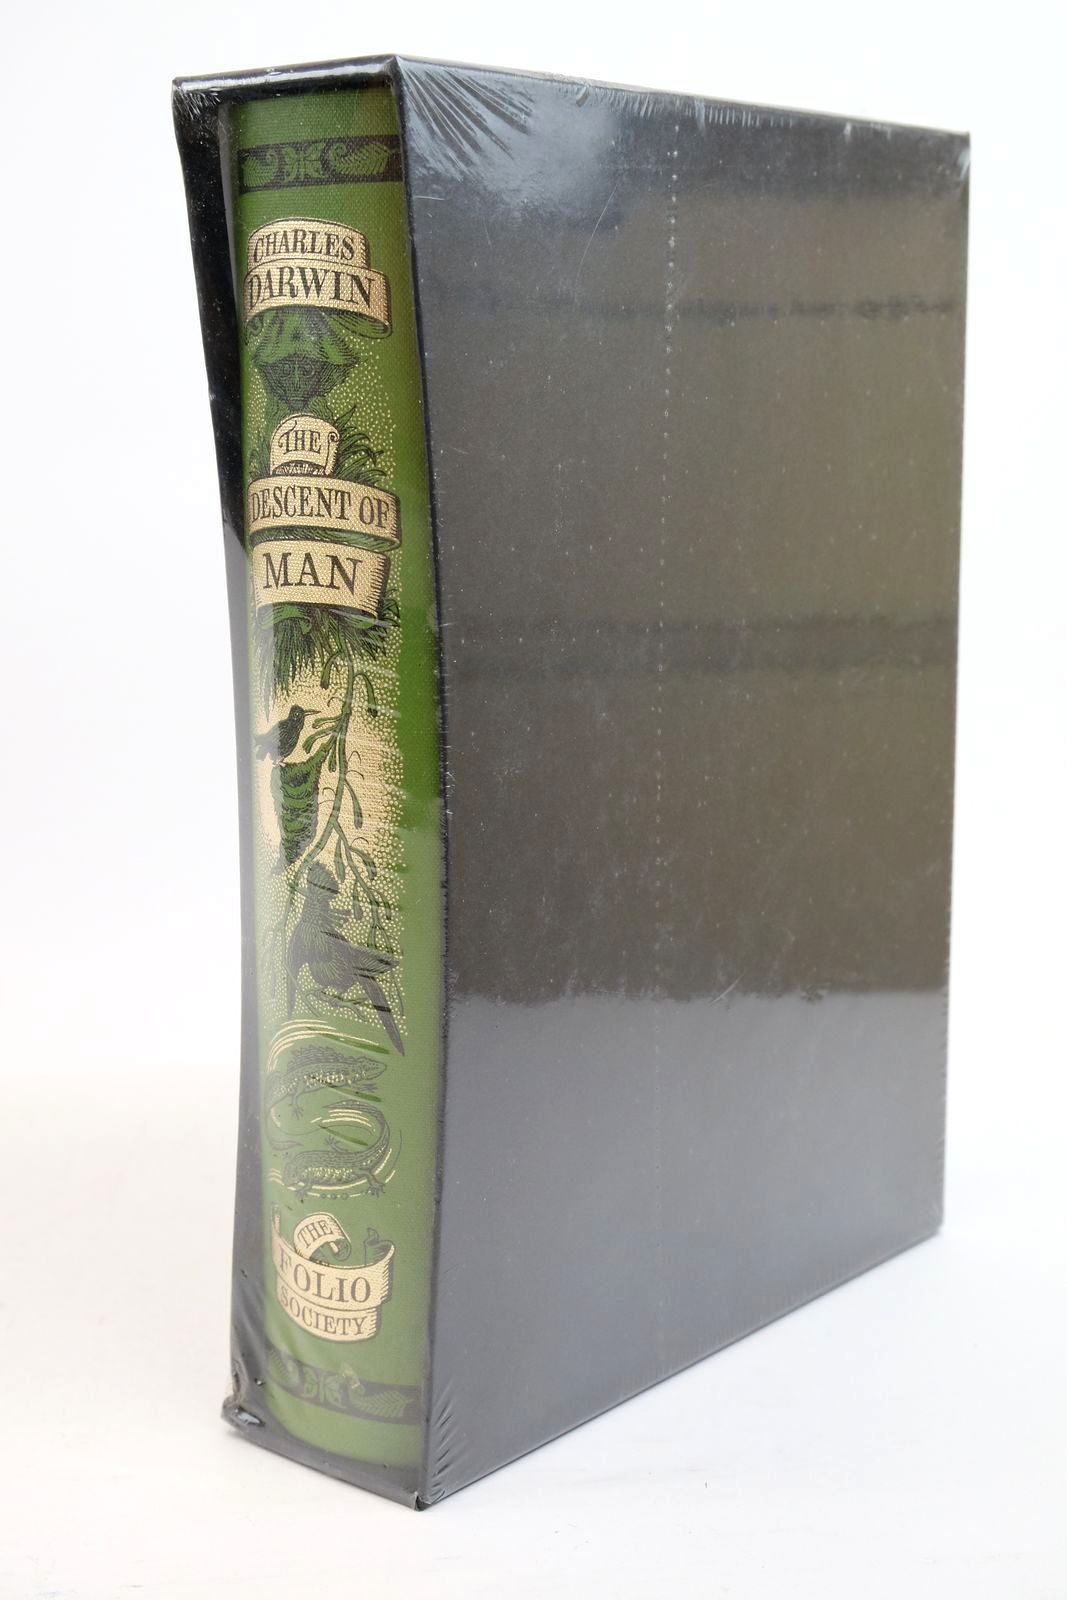 Photo of THE DESCENT OF MAN AND SELECTION IN RELATION TO SEX written by Darwin, Charles Dawkins, Richard published by Folio Society (STOCK CODE: 1321263)  for sale by Stella & Rose's Books